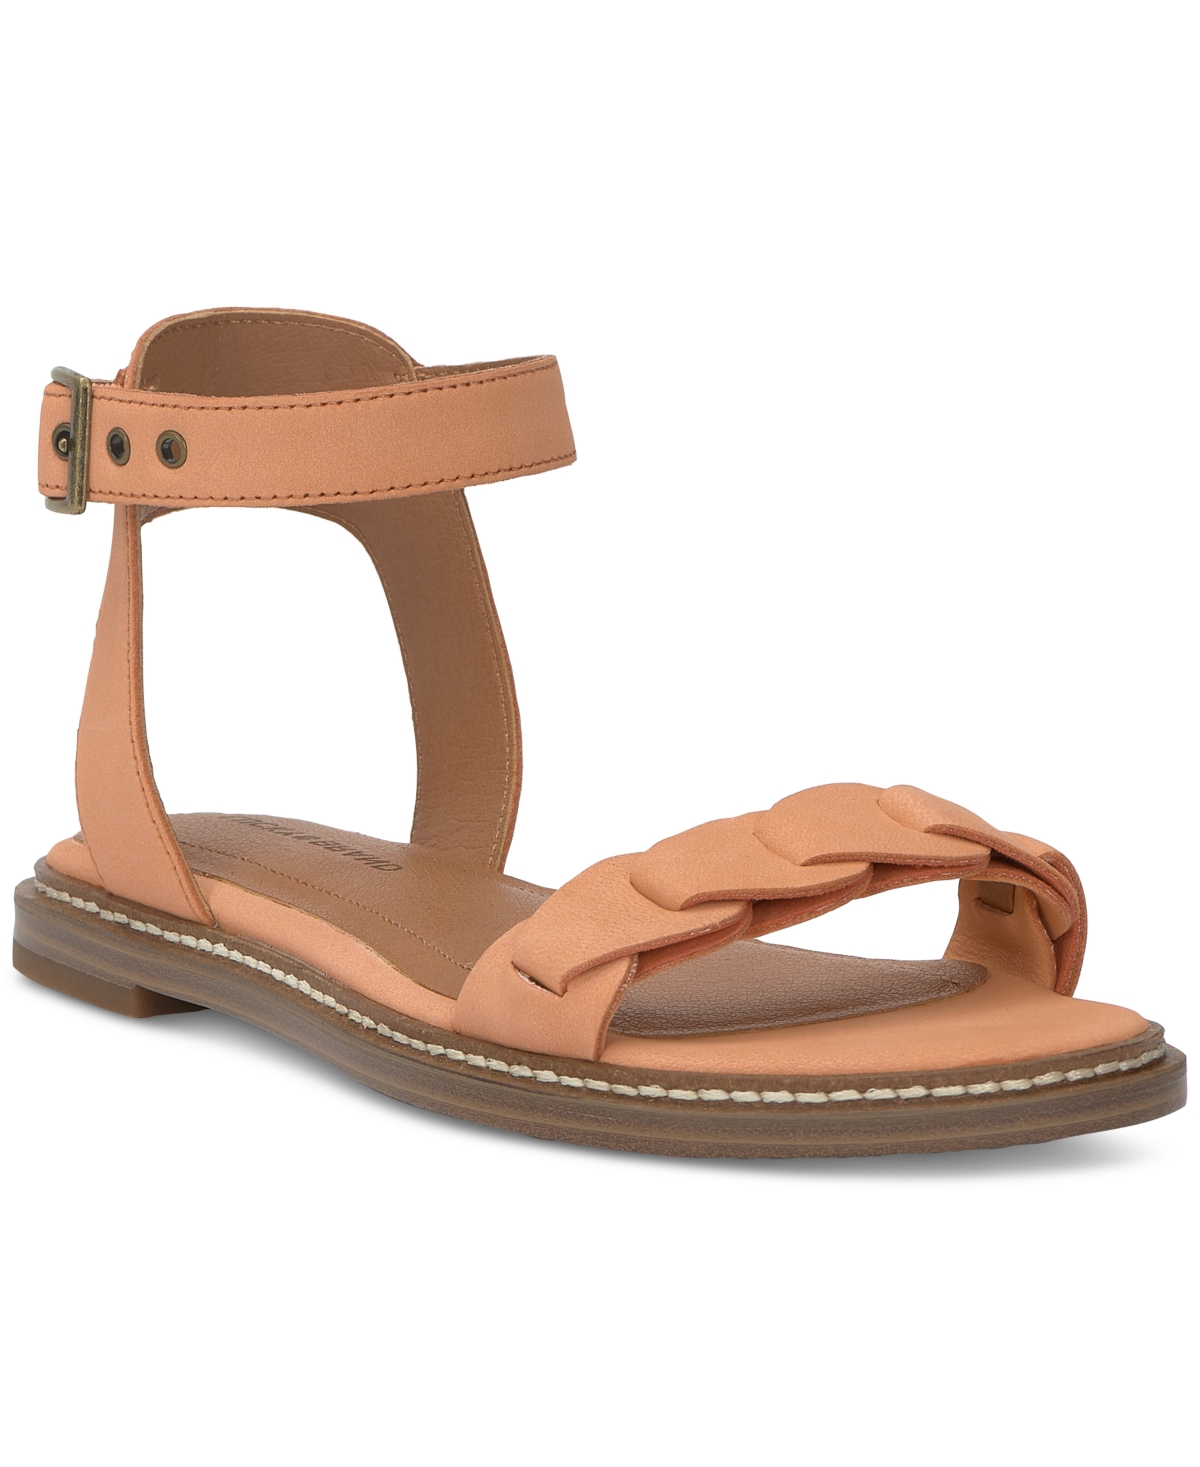 Women's Kyndall Ankle-Strap Flat Sandals - Putty Dove Leather